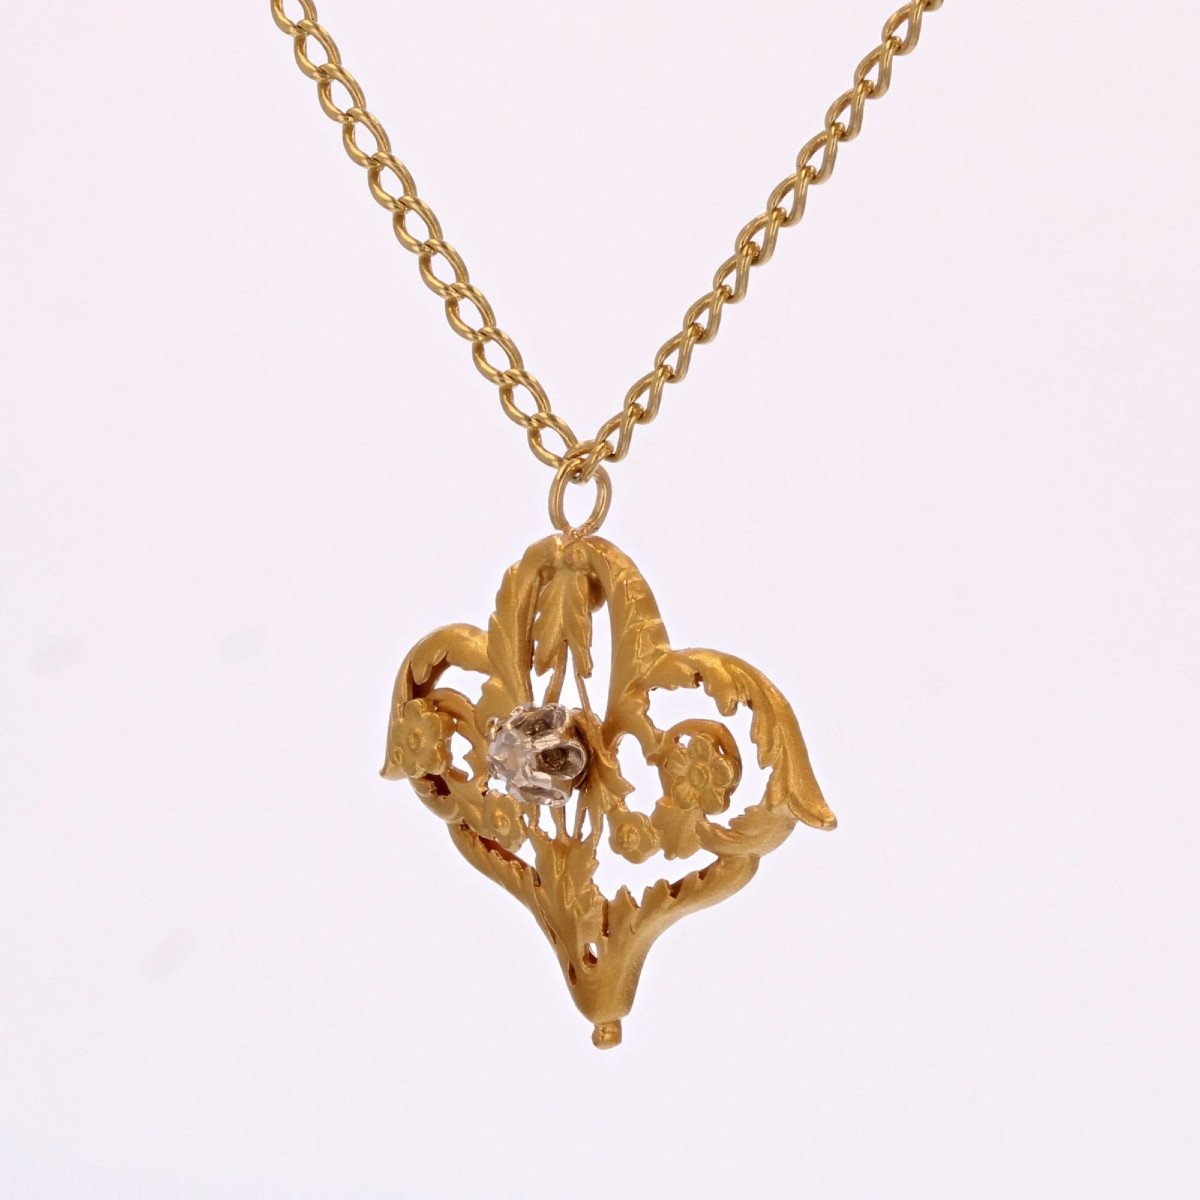 Old Chain And Its Arabesque And Rose-cut Diamond Pendant-photo-3